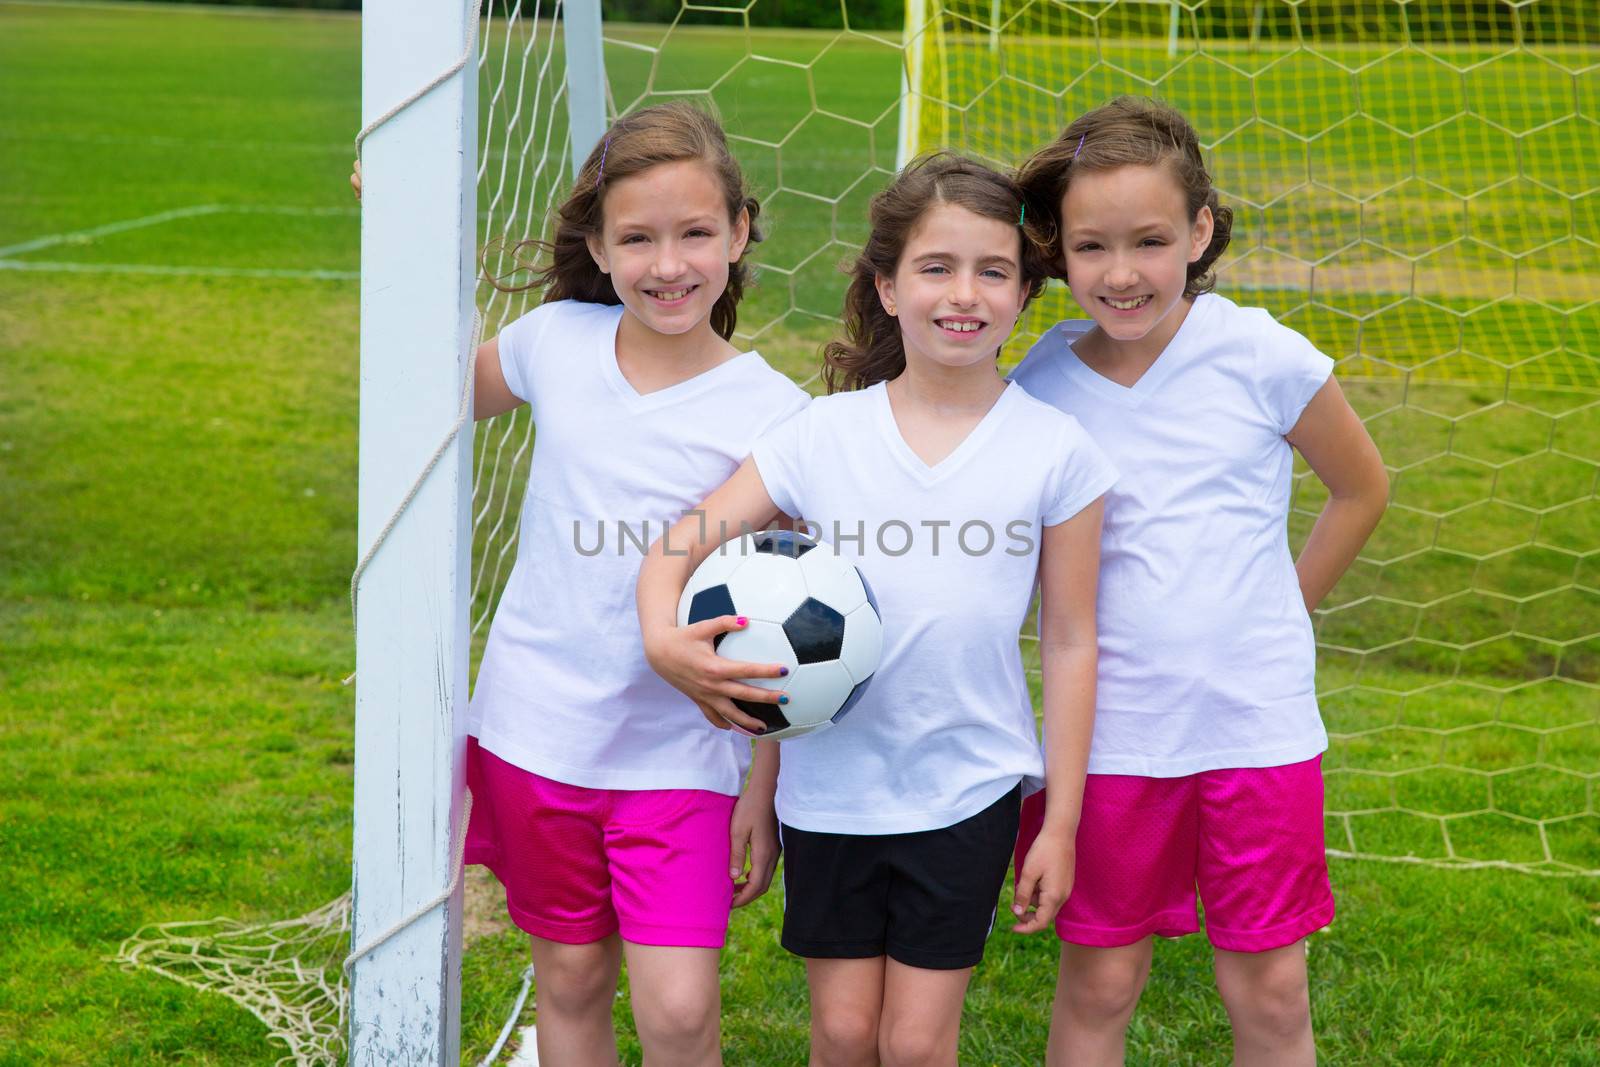 Soccer football kid girls team at sports outdoor fileld before match